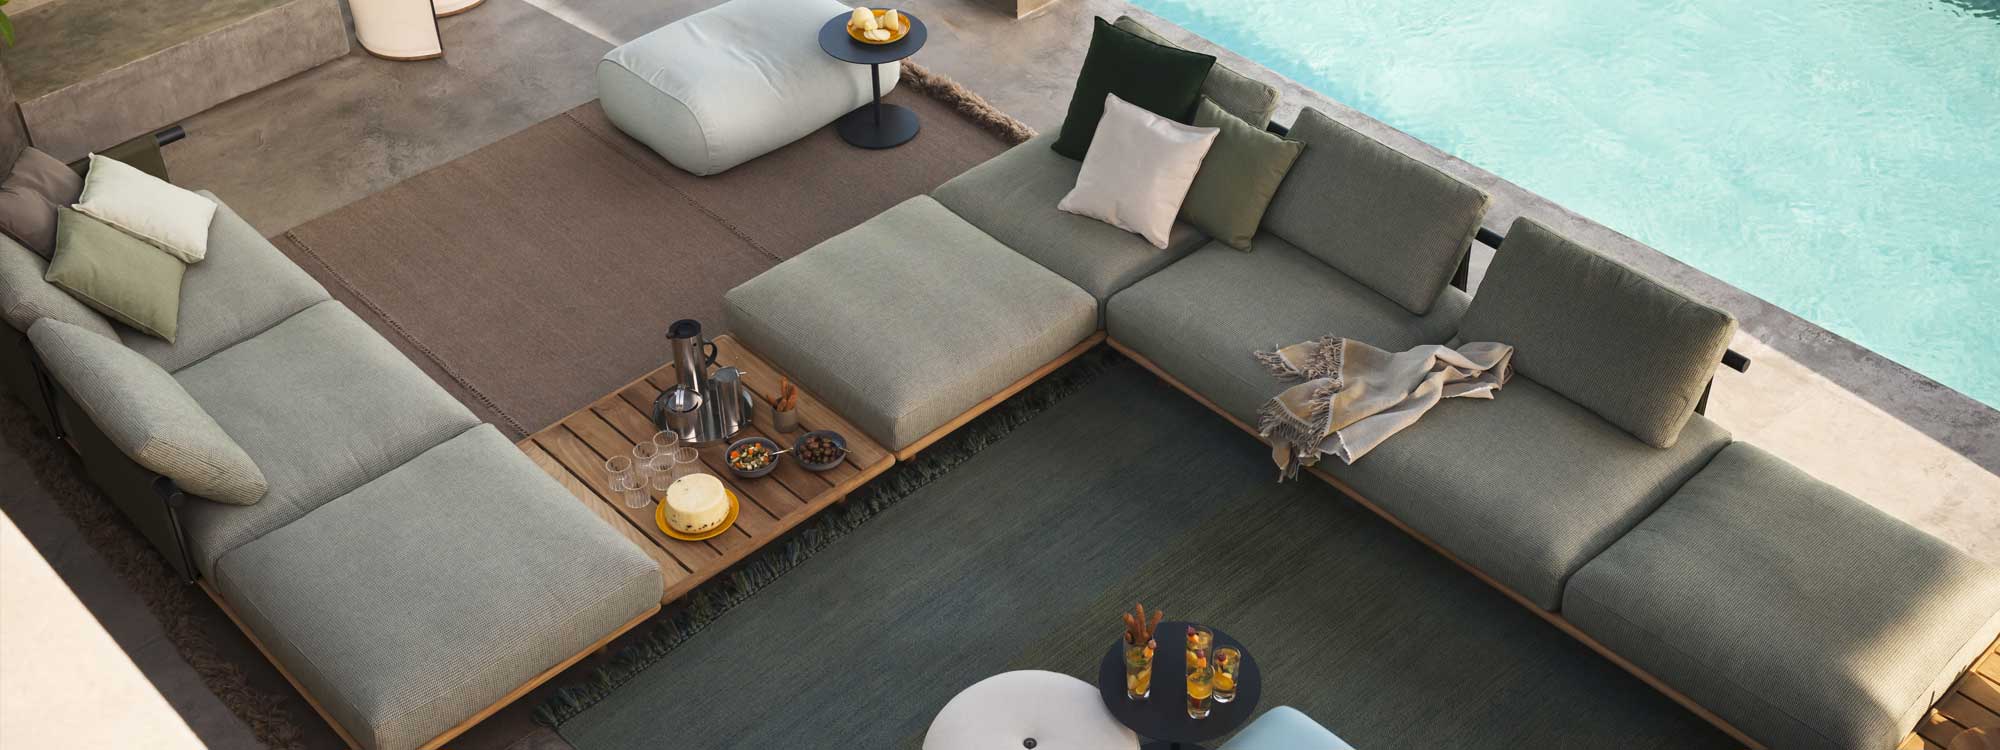 Image of S shaped Eden luxury outdoor sofa by RODA on poolside